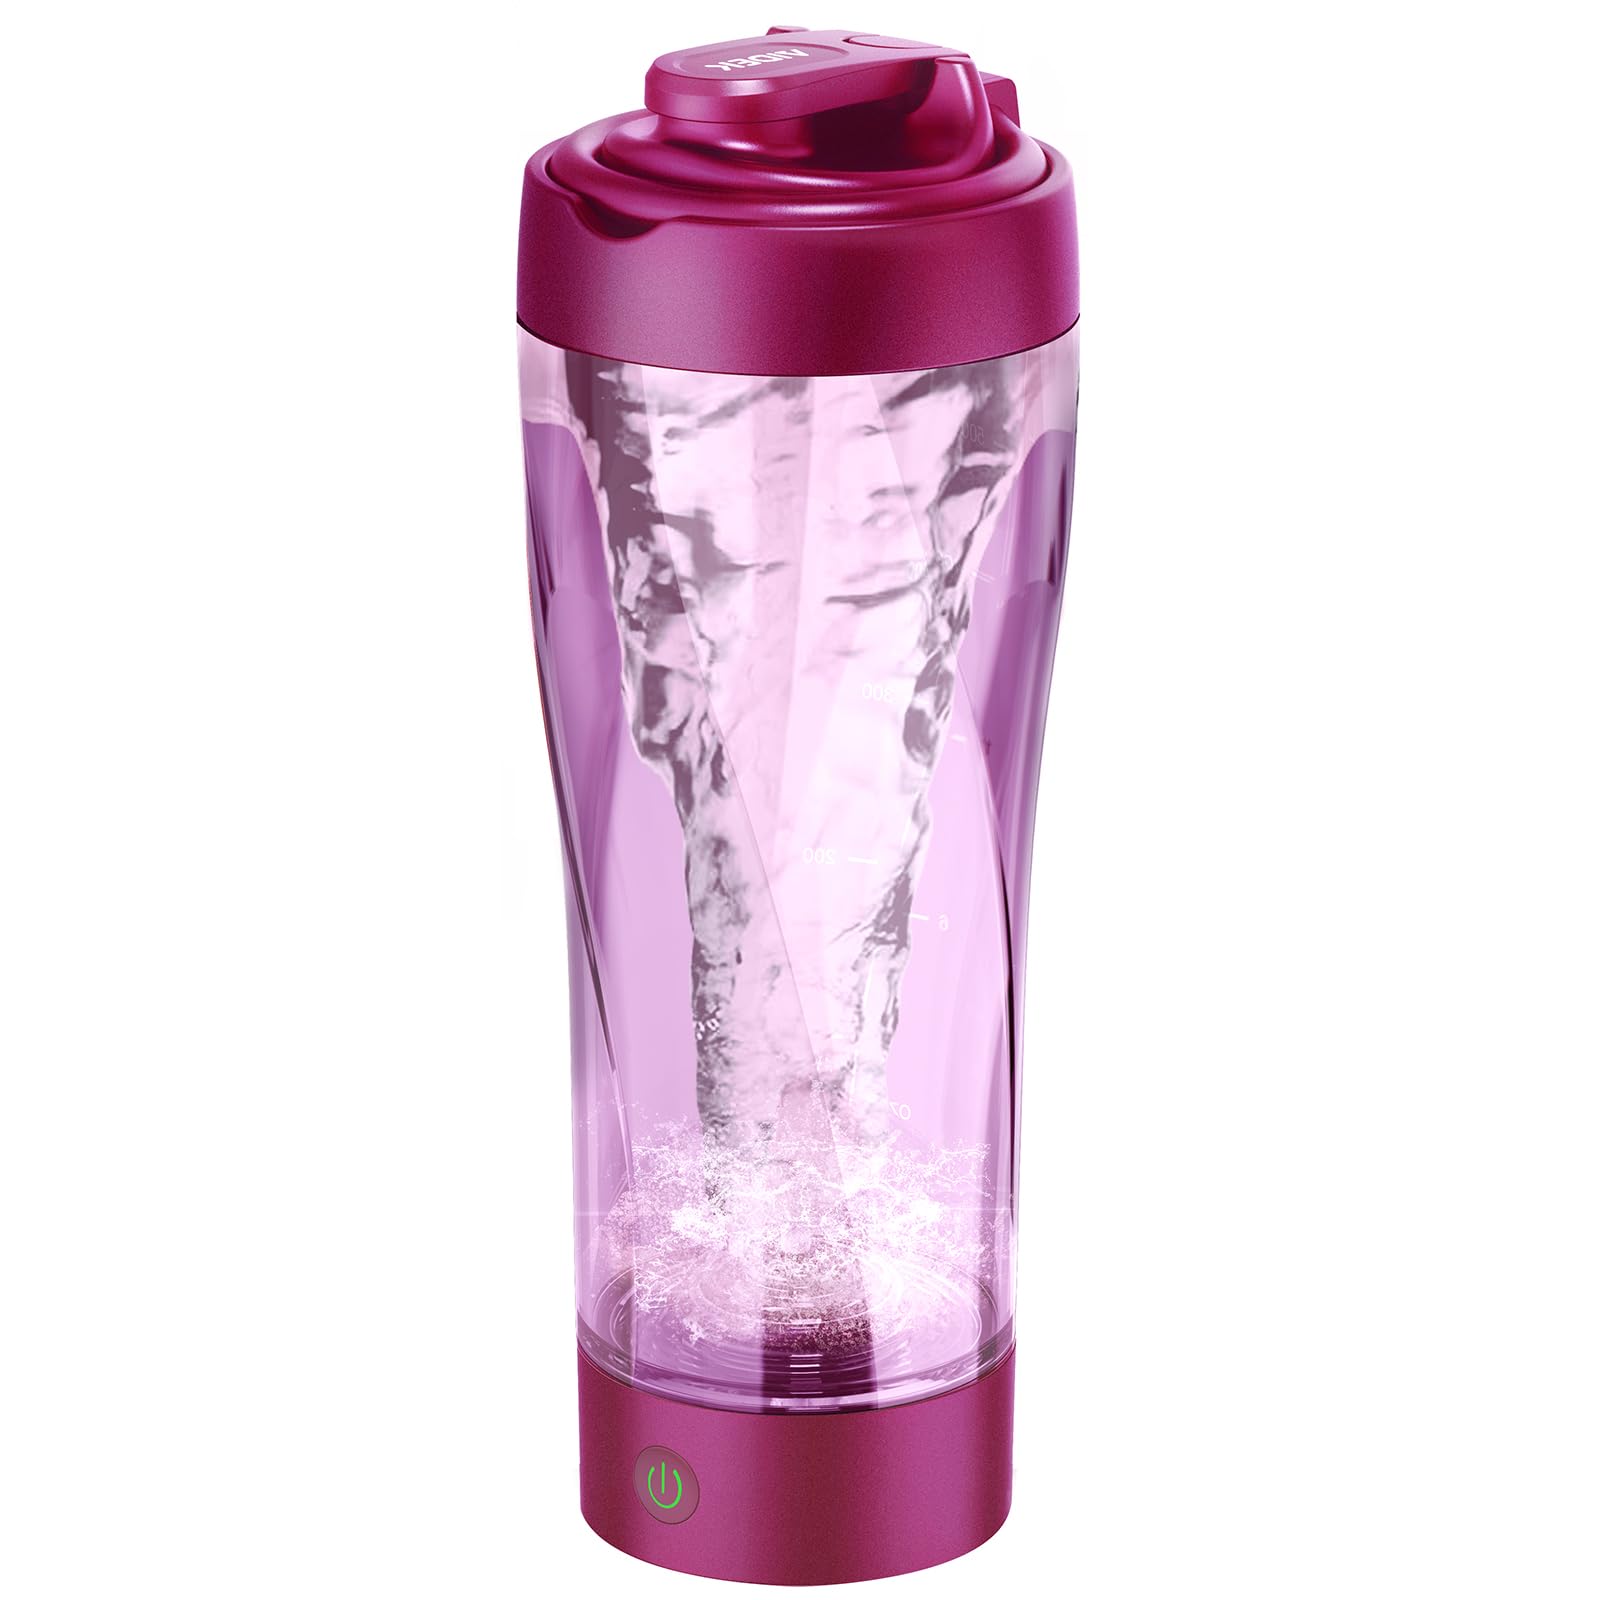 Aidek Electric Protein Shaker Bottle, 22oz Blender Bottle for Protein Mixes, Tritan Body - BPA Free, Type-C Rechargeable Shaker Cup Portable Blender Cups (Purple)